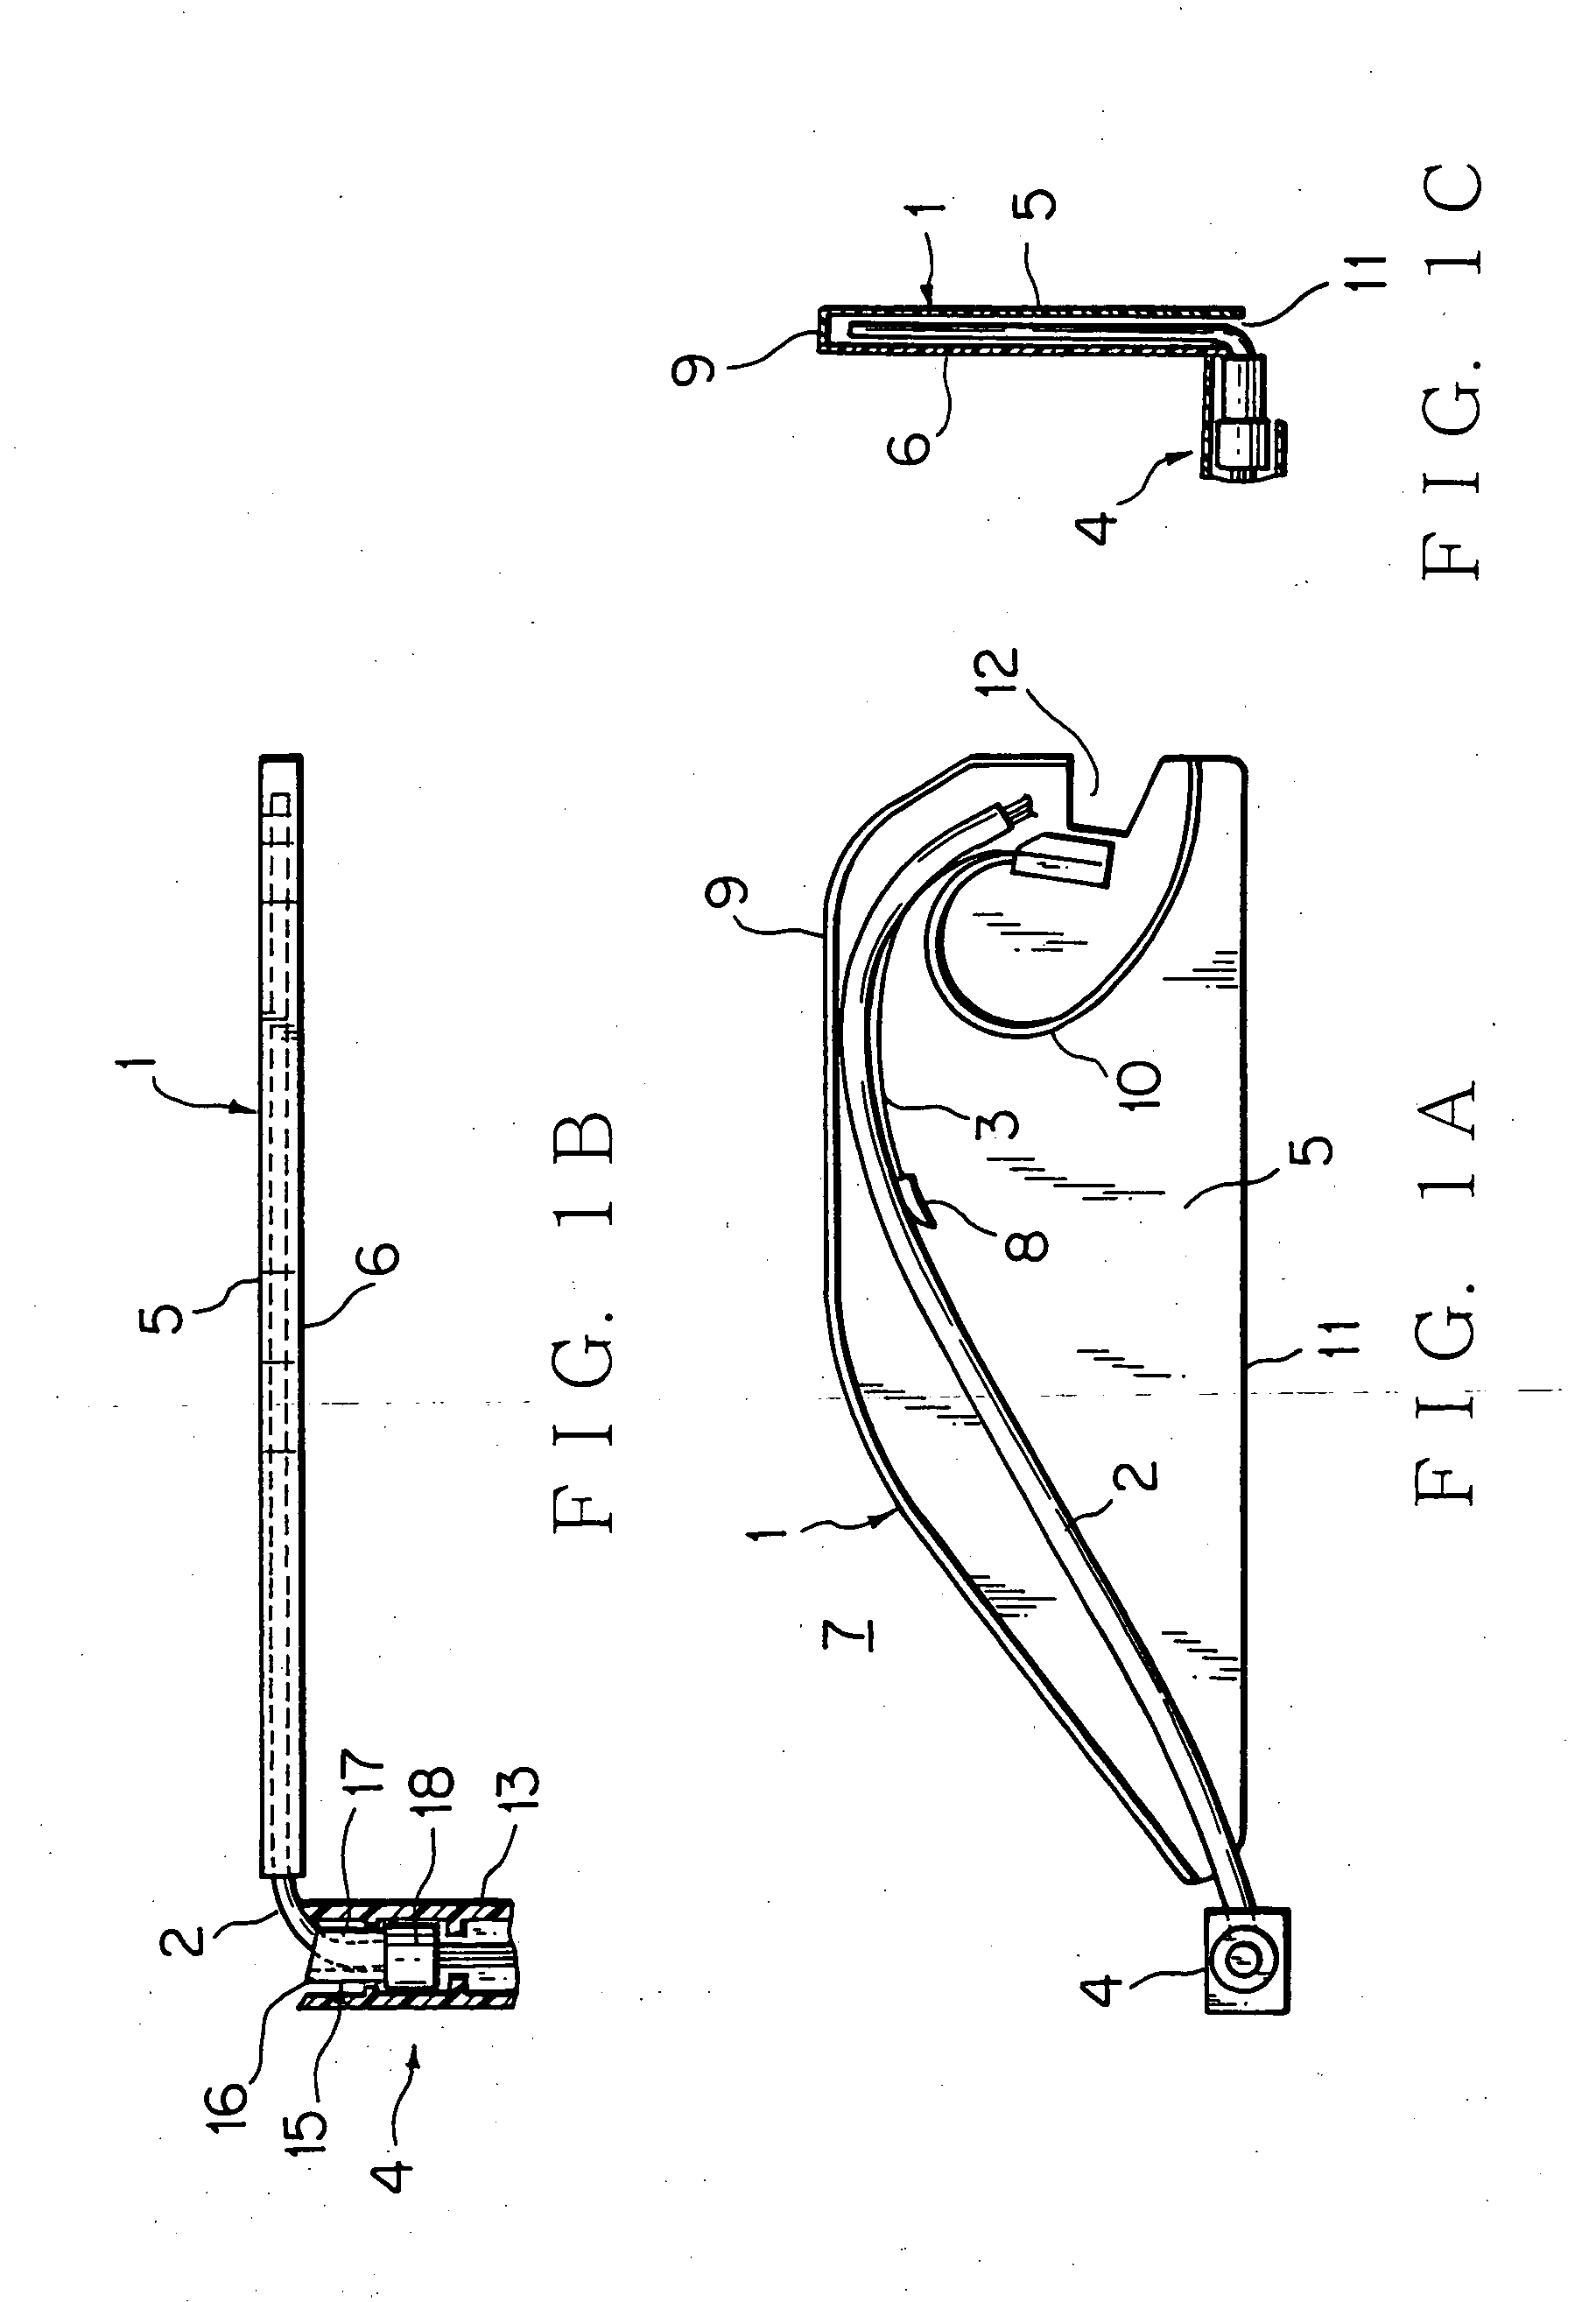 Harness holder and harness layout structure thereby